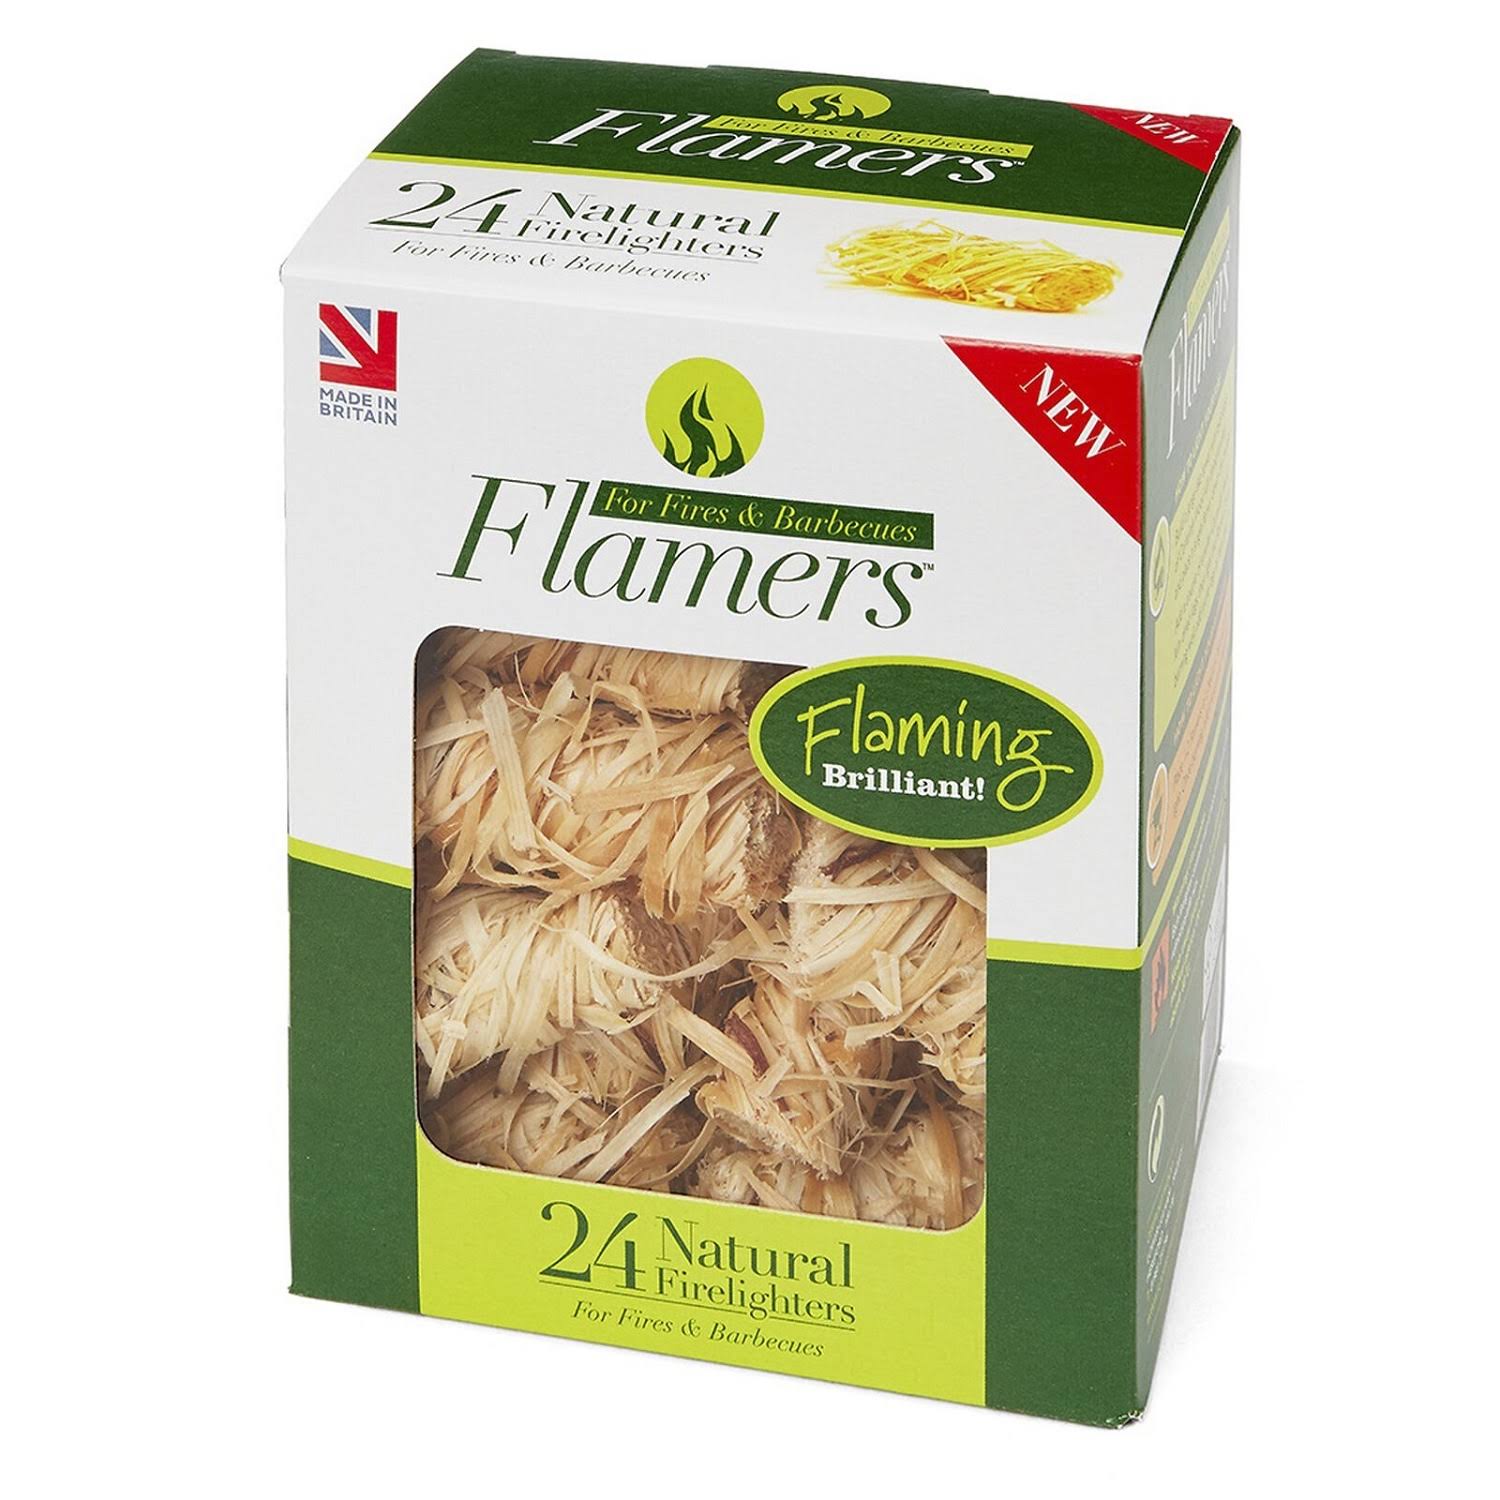 Flamers Natural Firelighters - 24 Firelighters